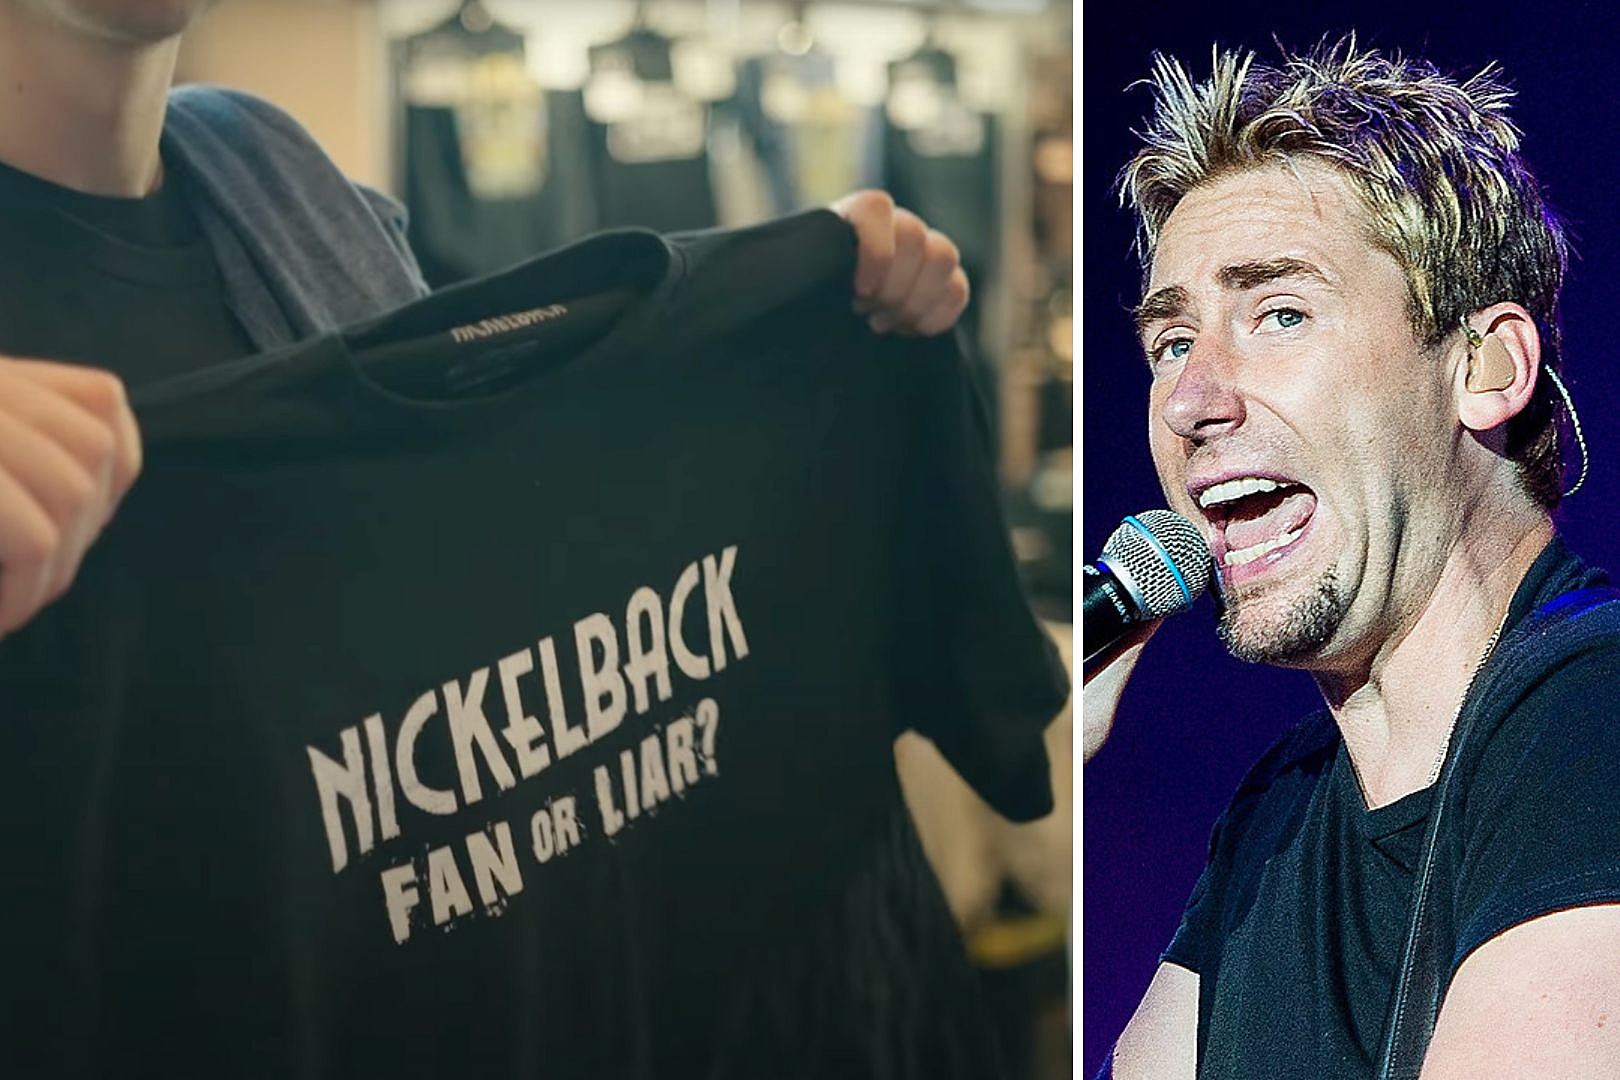 First Trailer for Nickelback Documentary Explores All the Hate